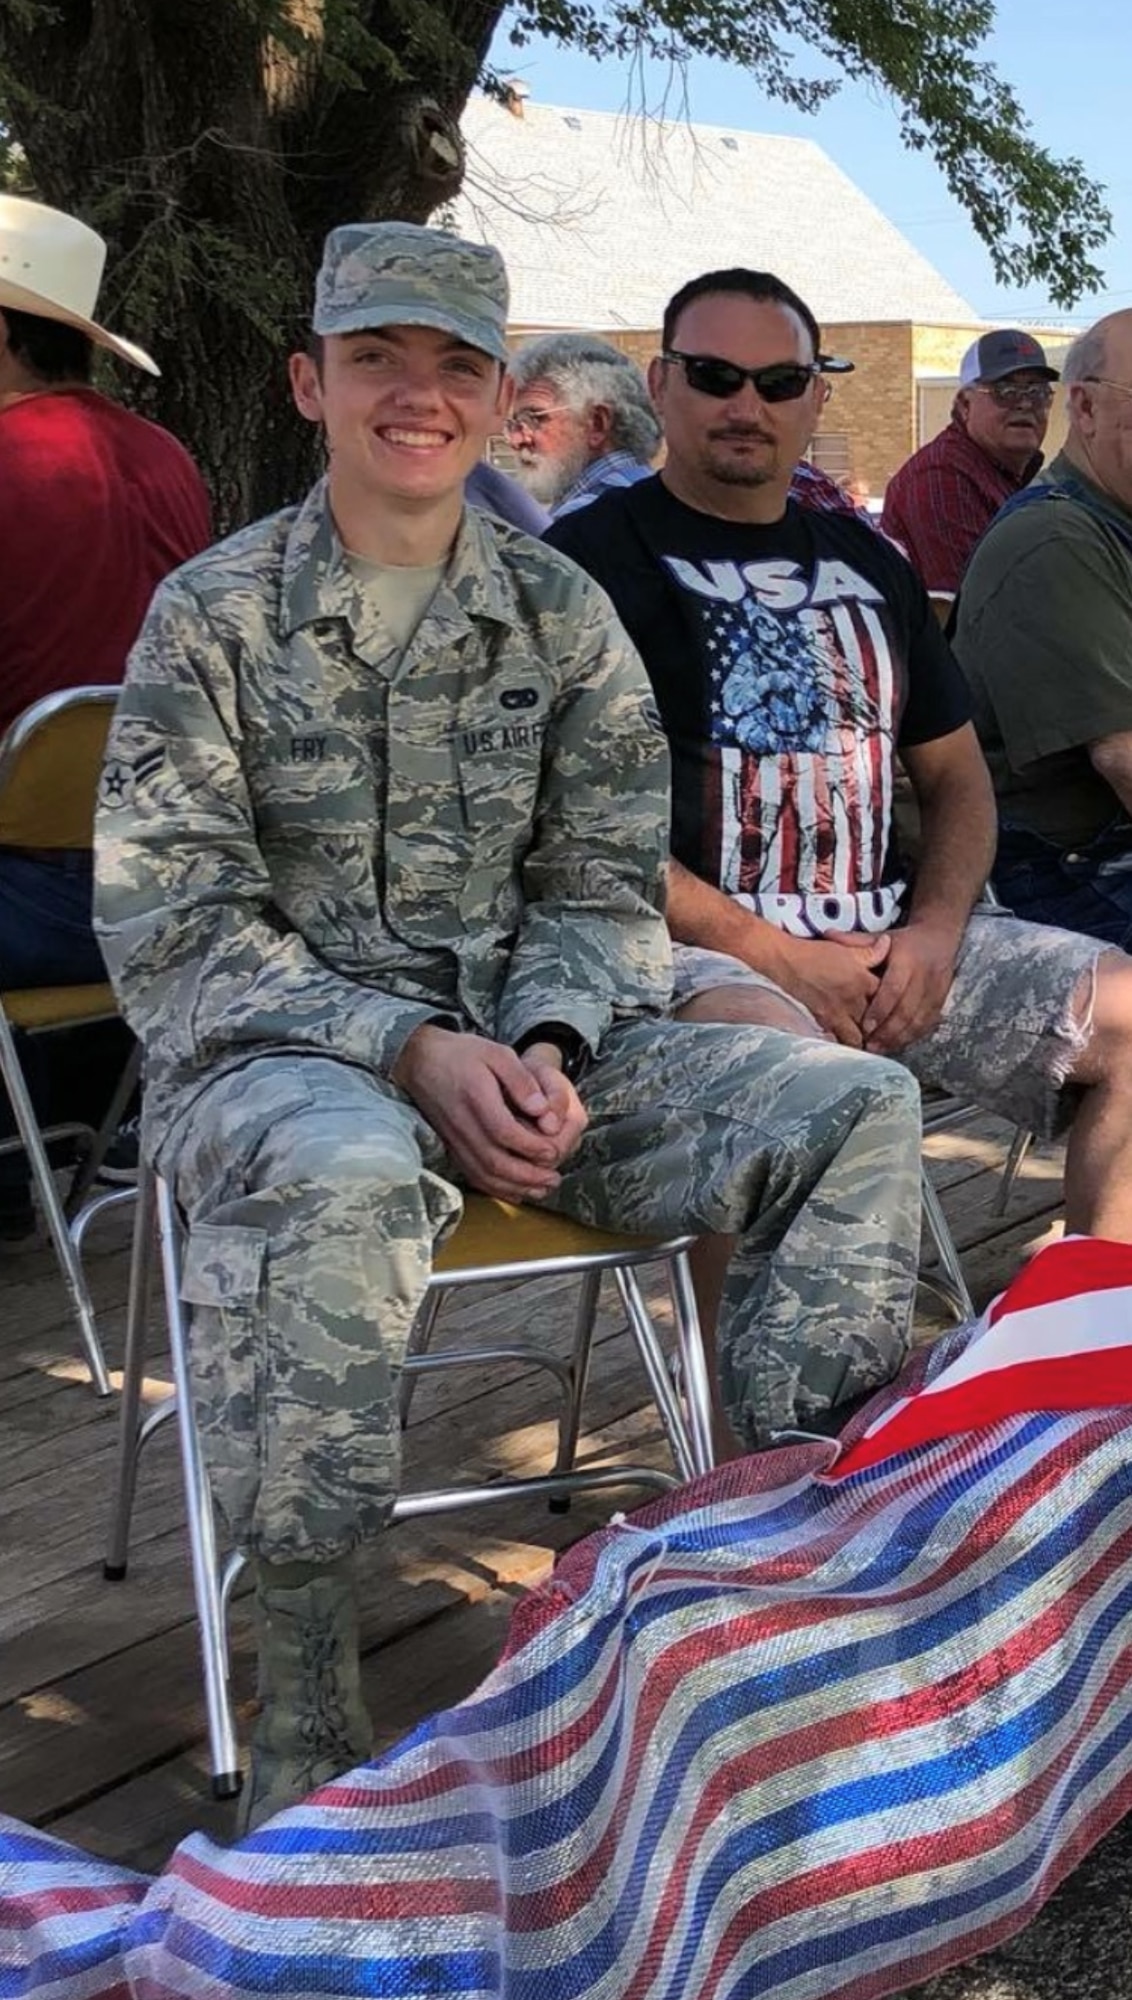 U.S. Air Force Staff Sgt. Bryson Fry, 97th Logistics Readiness Squadron ground transporter, pictured here as an Airman 1st Class, poses with his father, Branden Fry, 97th Aircraft Maintenance Squadron hydraulics systems mechanic, during an Independence Day parade in Sentinel, Oklahoma, July 4, 2019. Branden and Bryson both joined the military immediately after graduating high school. (Courtesy photo by Branden Fry)